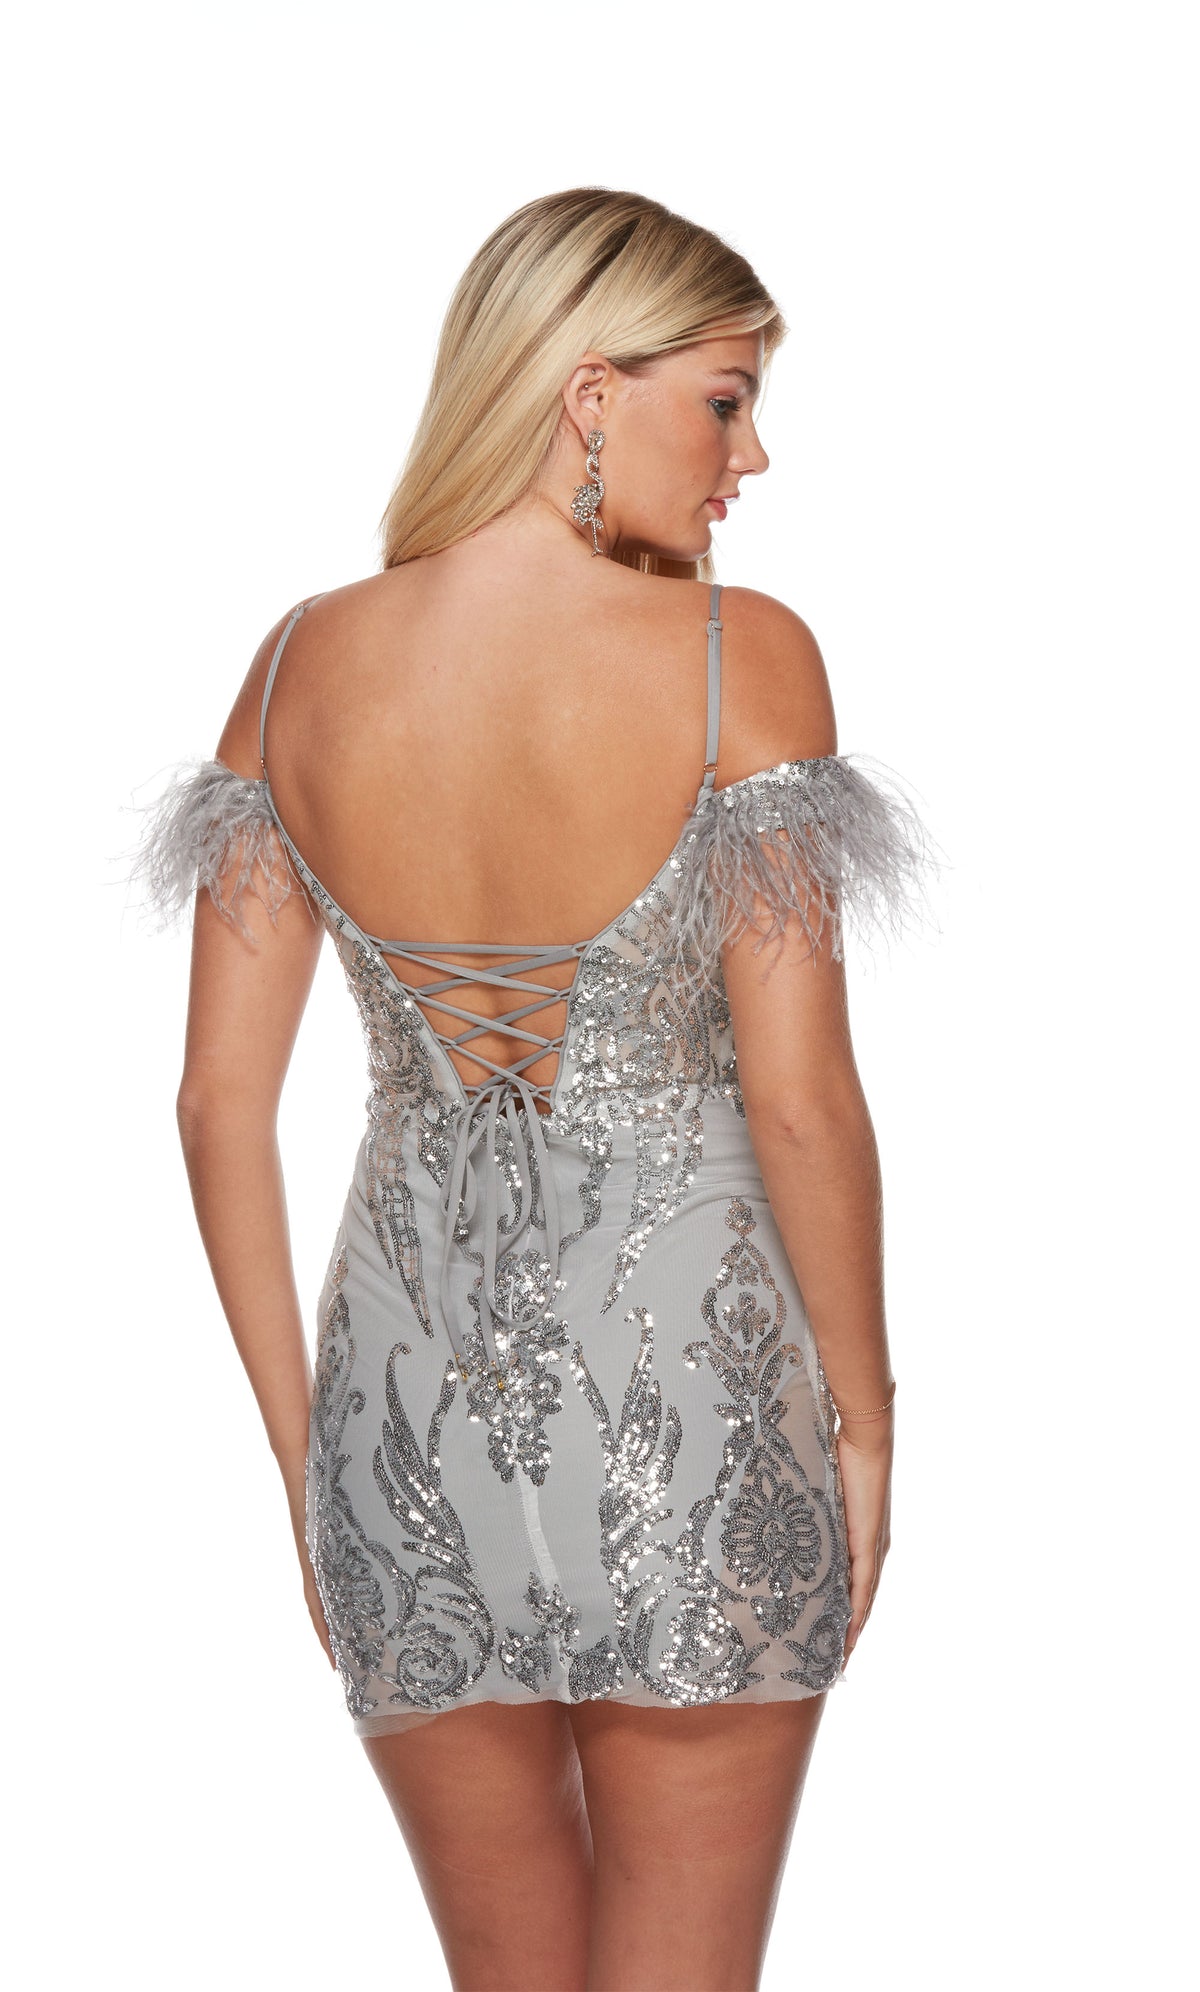 A fitted short silver homecoming dress highlighting an off-the-shoulder neckline, a lace-up back, and an intricate sequin embellished design throughout.